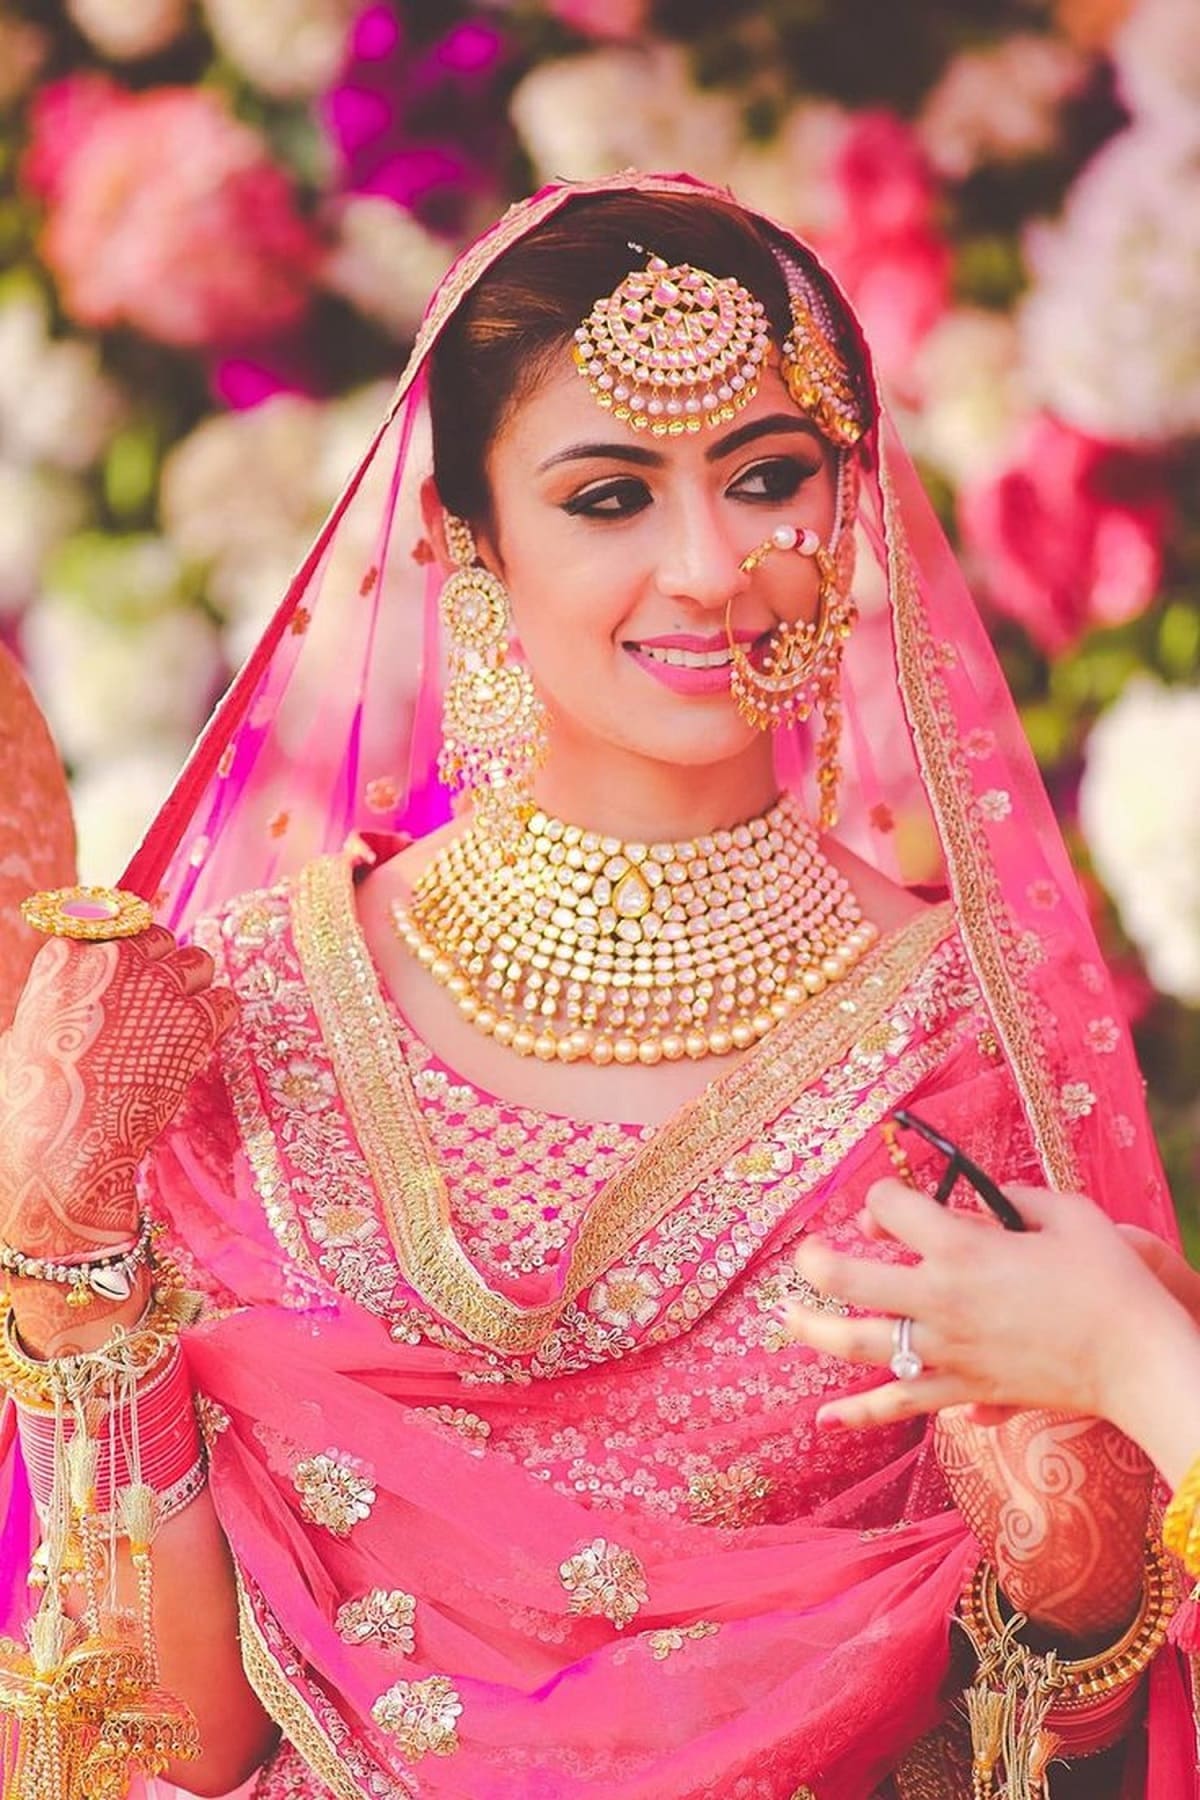 Sikh Bride Wore A Green And PinkHued Salwar Suit With Parandi Hairstyle  For Her Wedding Day